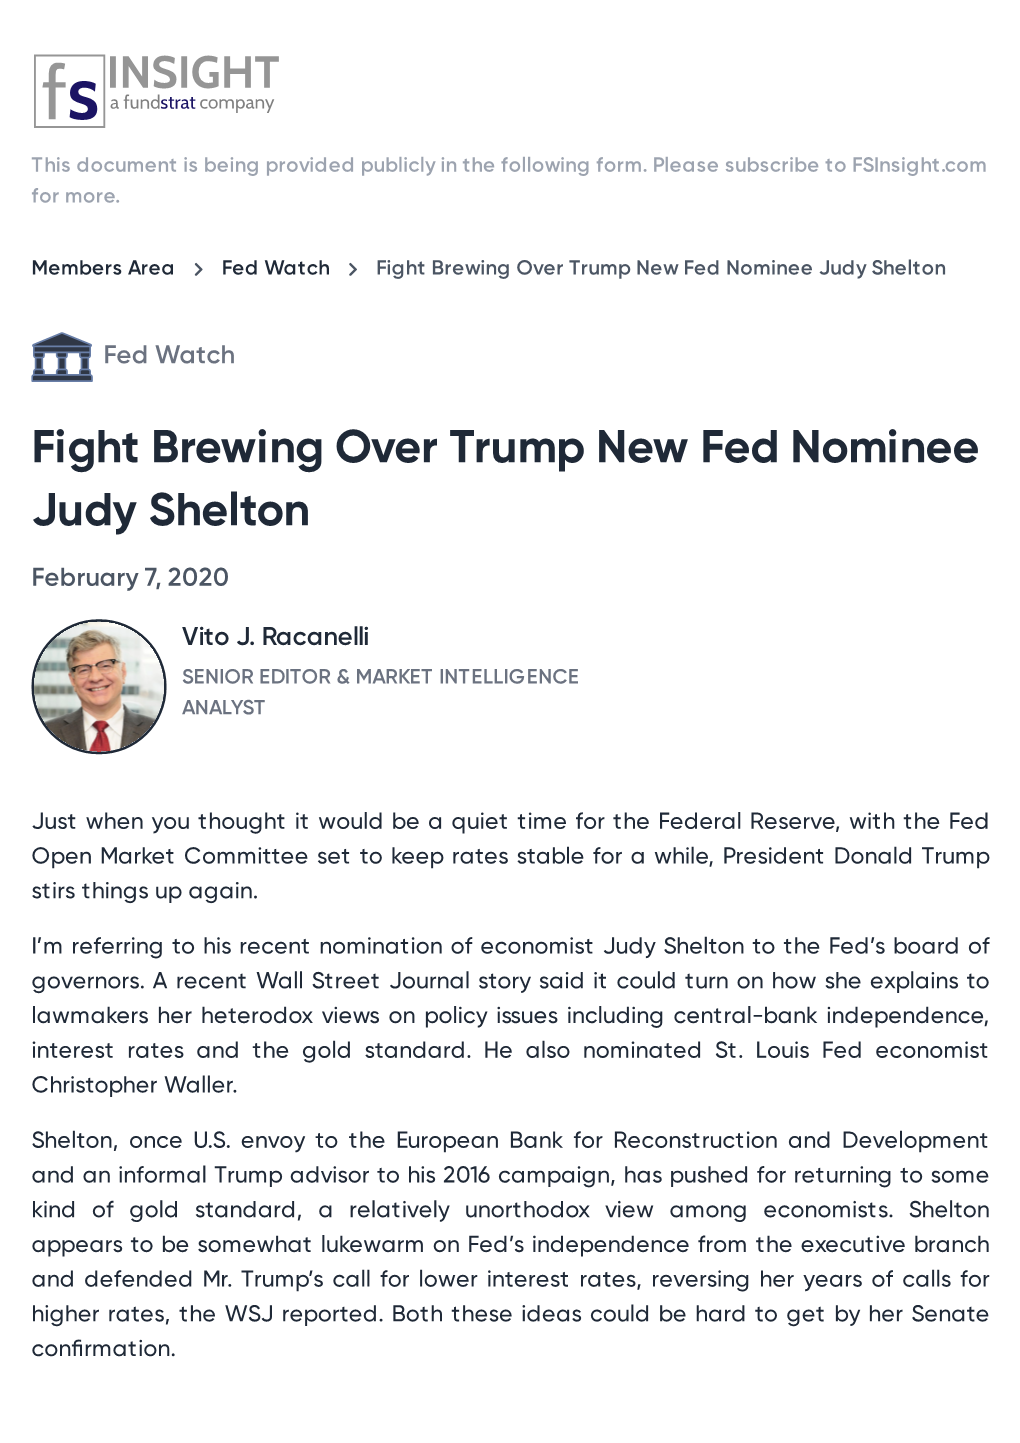 Fight Brewing Over Trump New Fed Nominee Judy Shelton